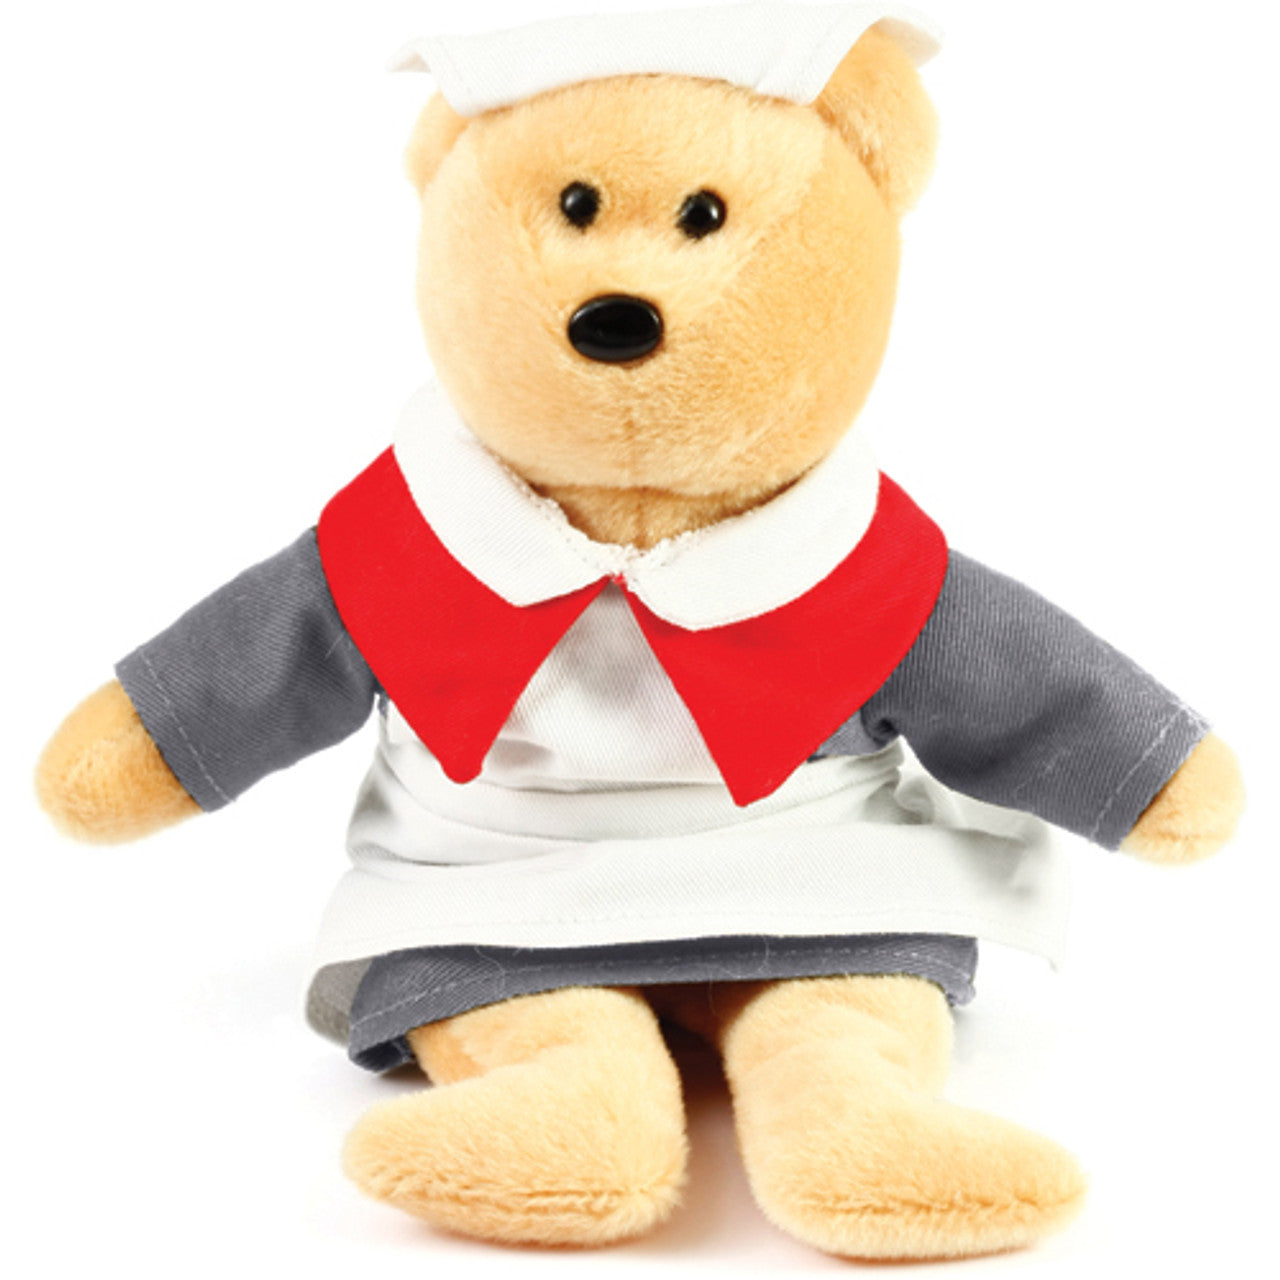 The Little Aussie WW1 Nurse Bear is a collectible that pays tribute to the volunteer nurses who served with the Australian Imperial Force during the Great War of 1914-1918. These brave women saved lives and gave hope to our diggers, and now you can honour their memory with this special bear. www.moralepatches.com.au